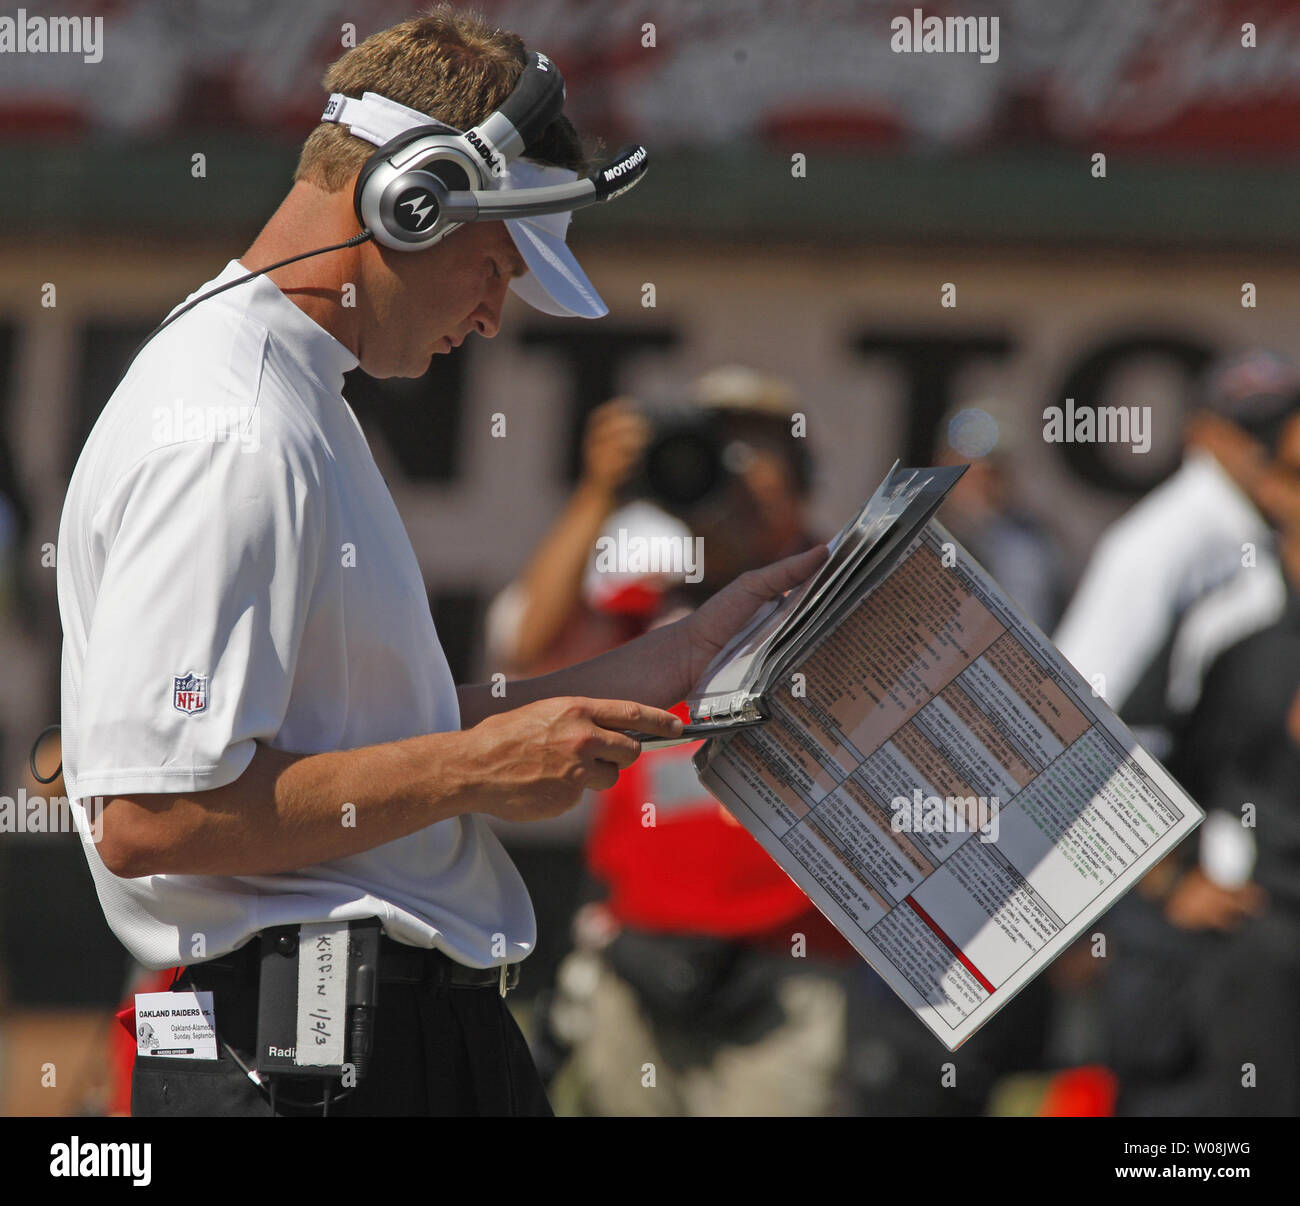 Oakland Raiders head coach Lane Kiffin studies formation photographs during play against the San Diego Chargers at the Coliseum in Oakland, California on September 28, 2008. The Chargers defeated the Raiders 28-18.  (UPI Photo/Terry Schmitt) Stock Photo